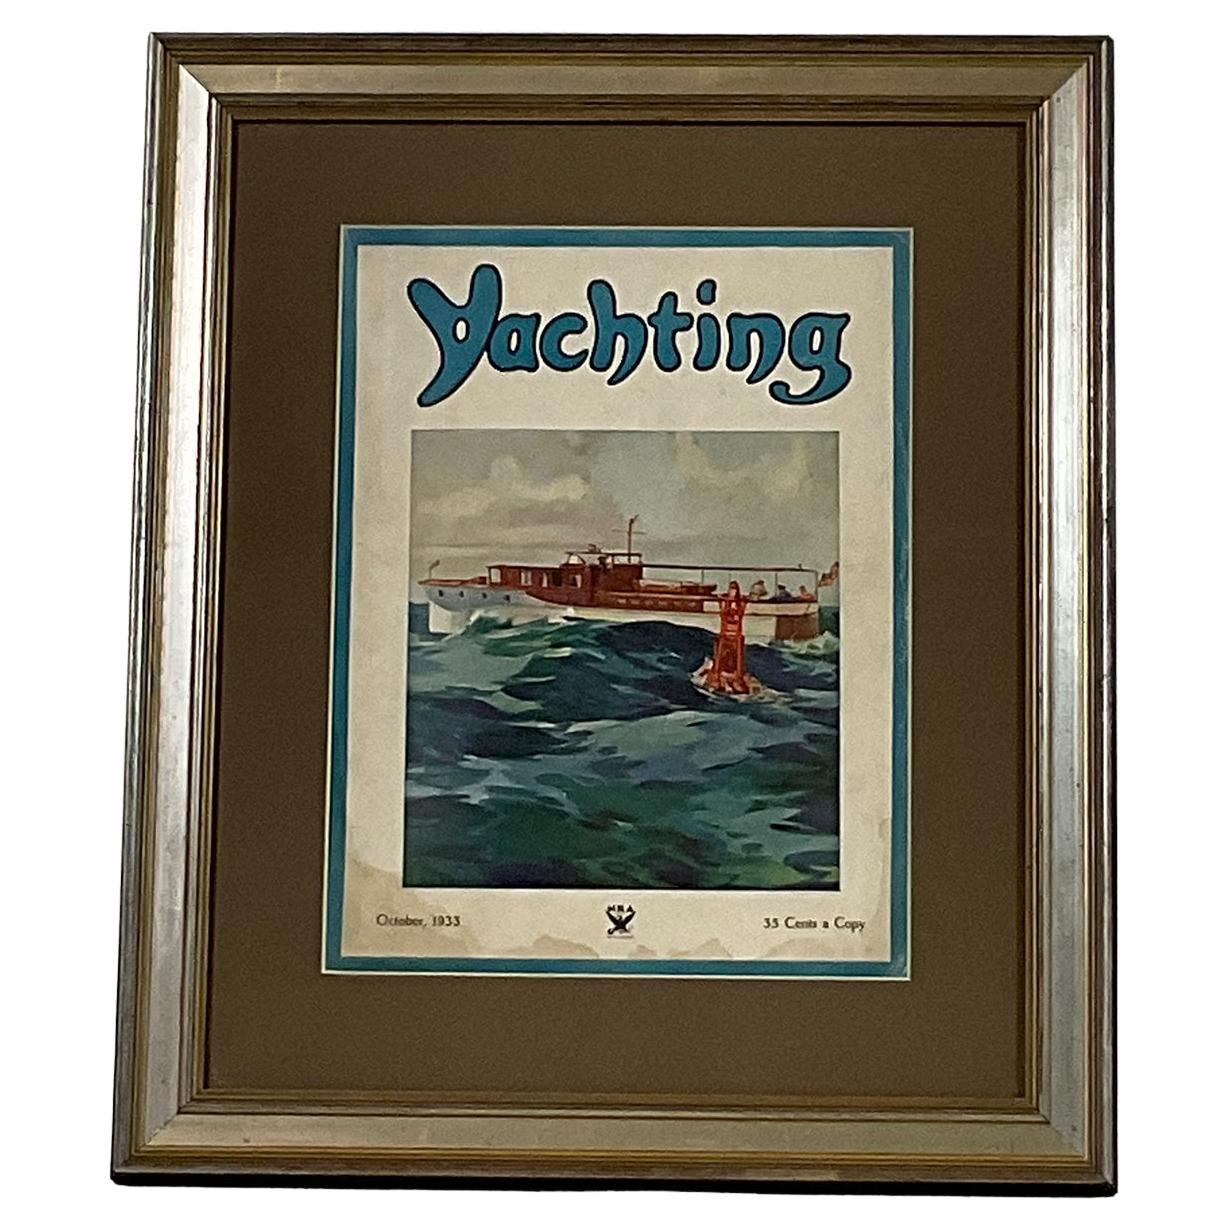 Yachting Magazine Cover in Frame